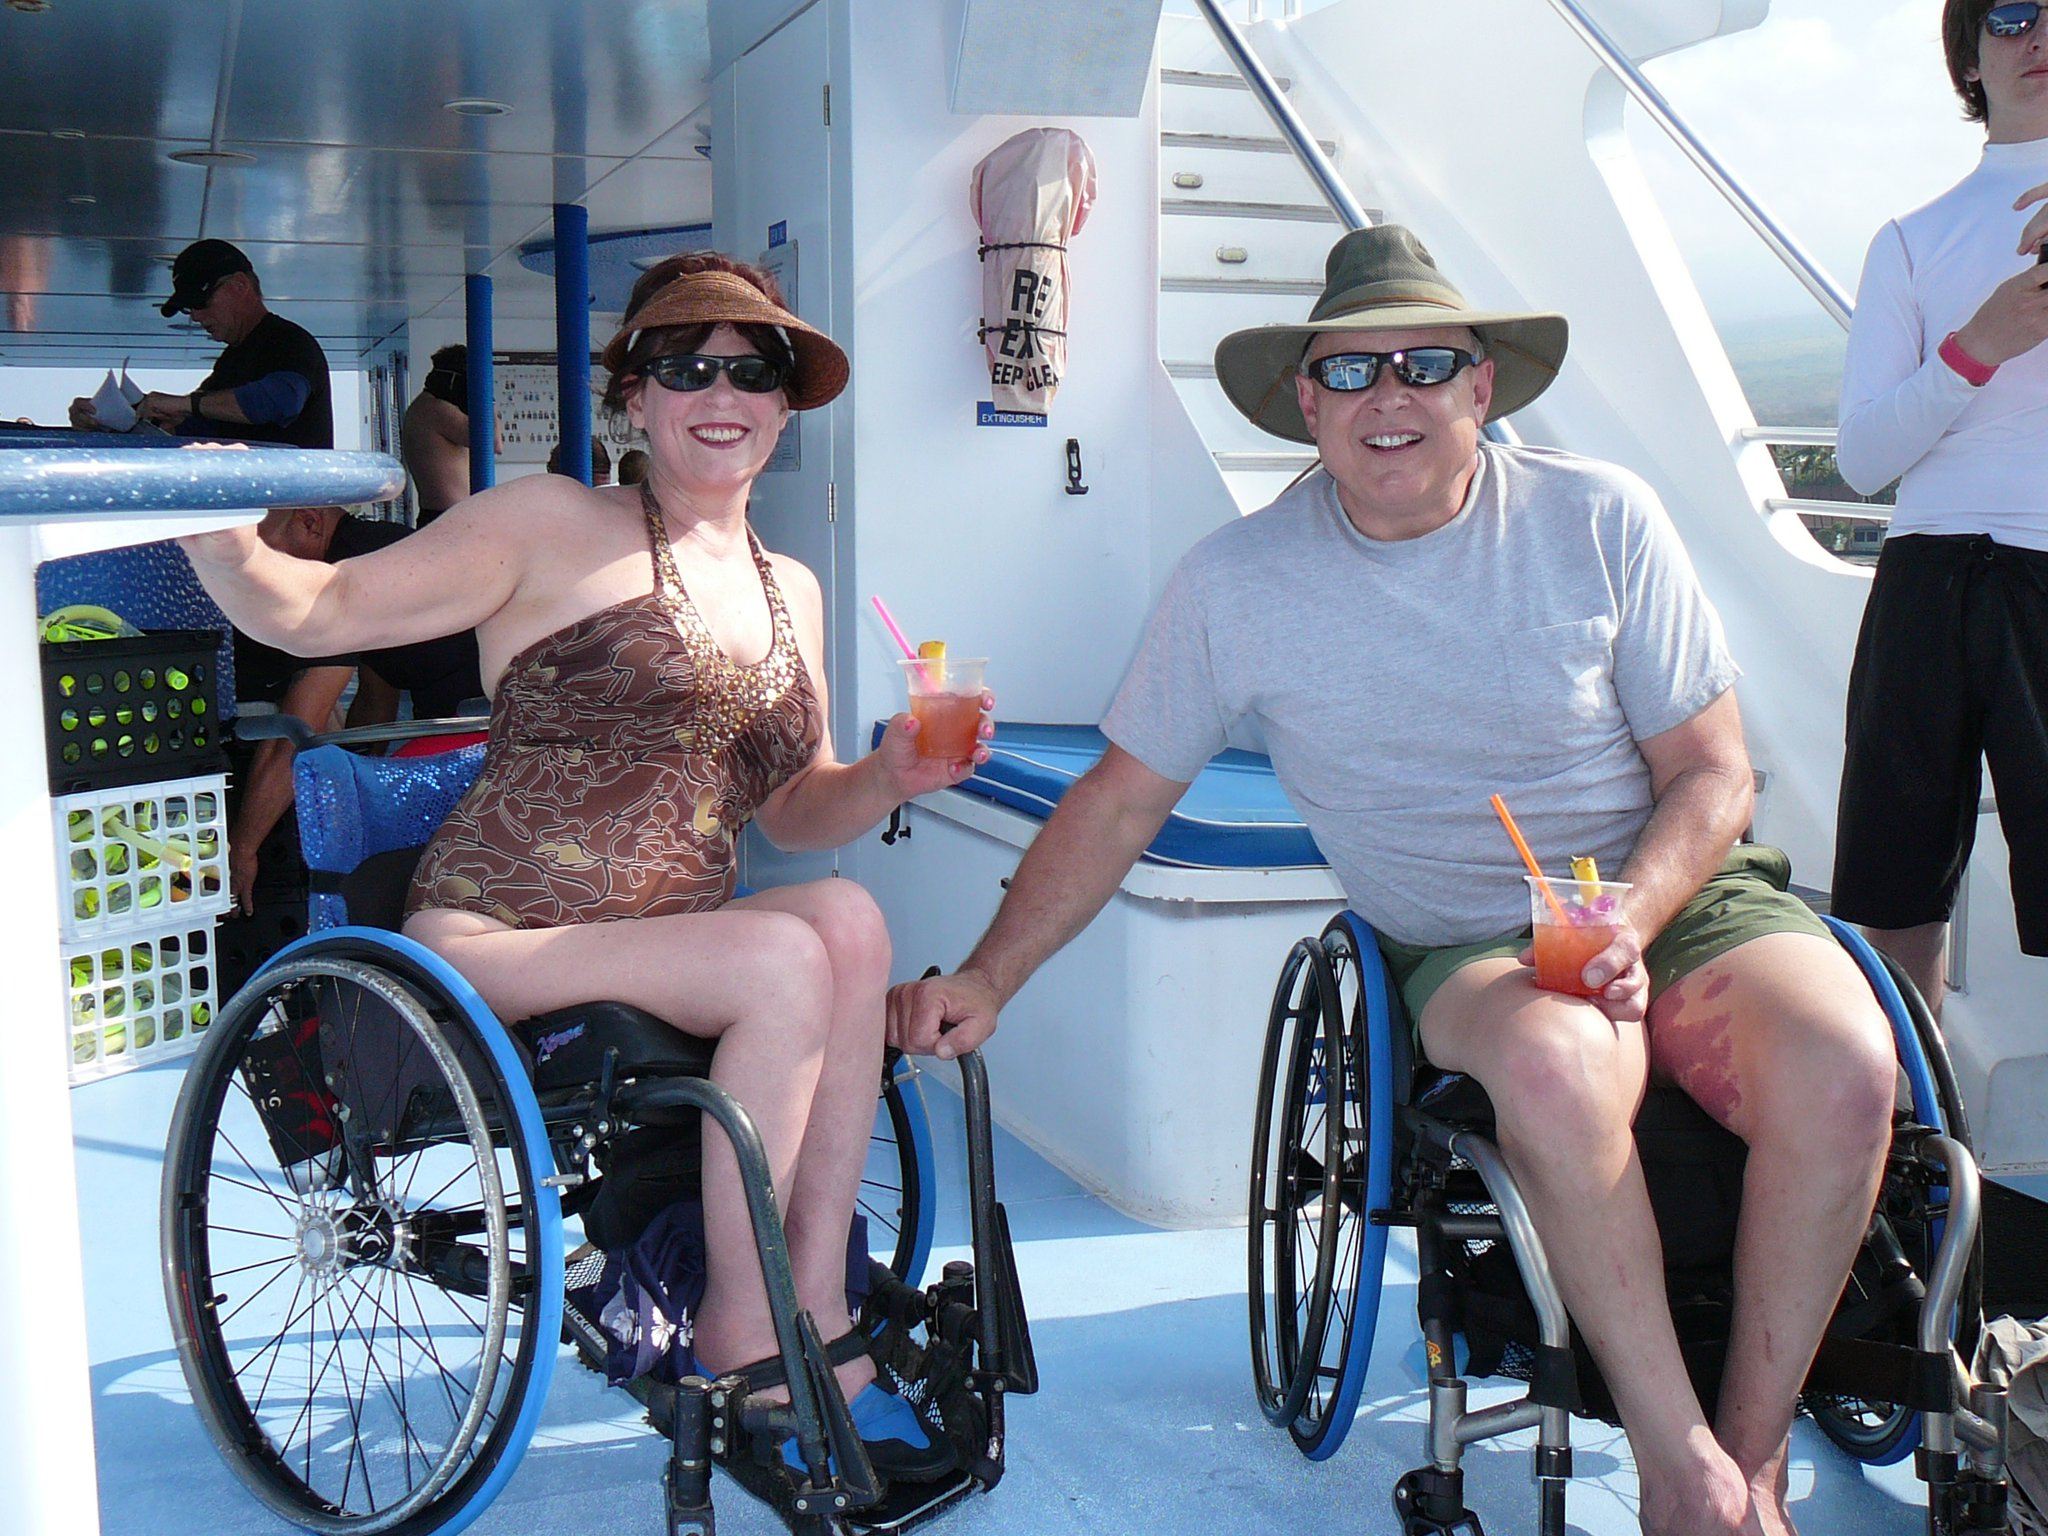 Julienne vowed never to let Transverse Myelitis slow her down. She and her husband Dan (pictured) travel often, like in this trip to Kona, Hawaii.